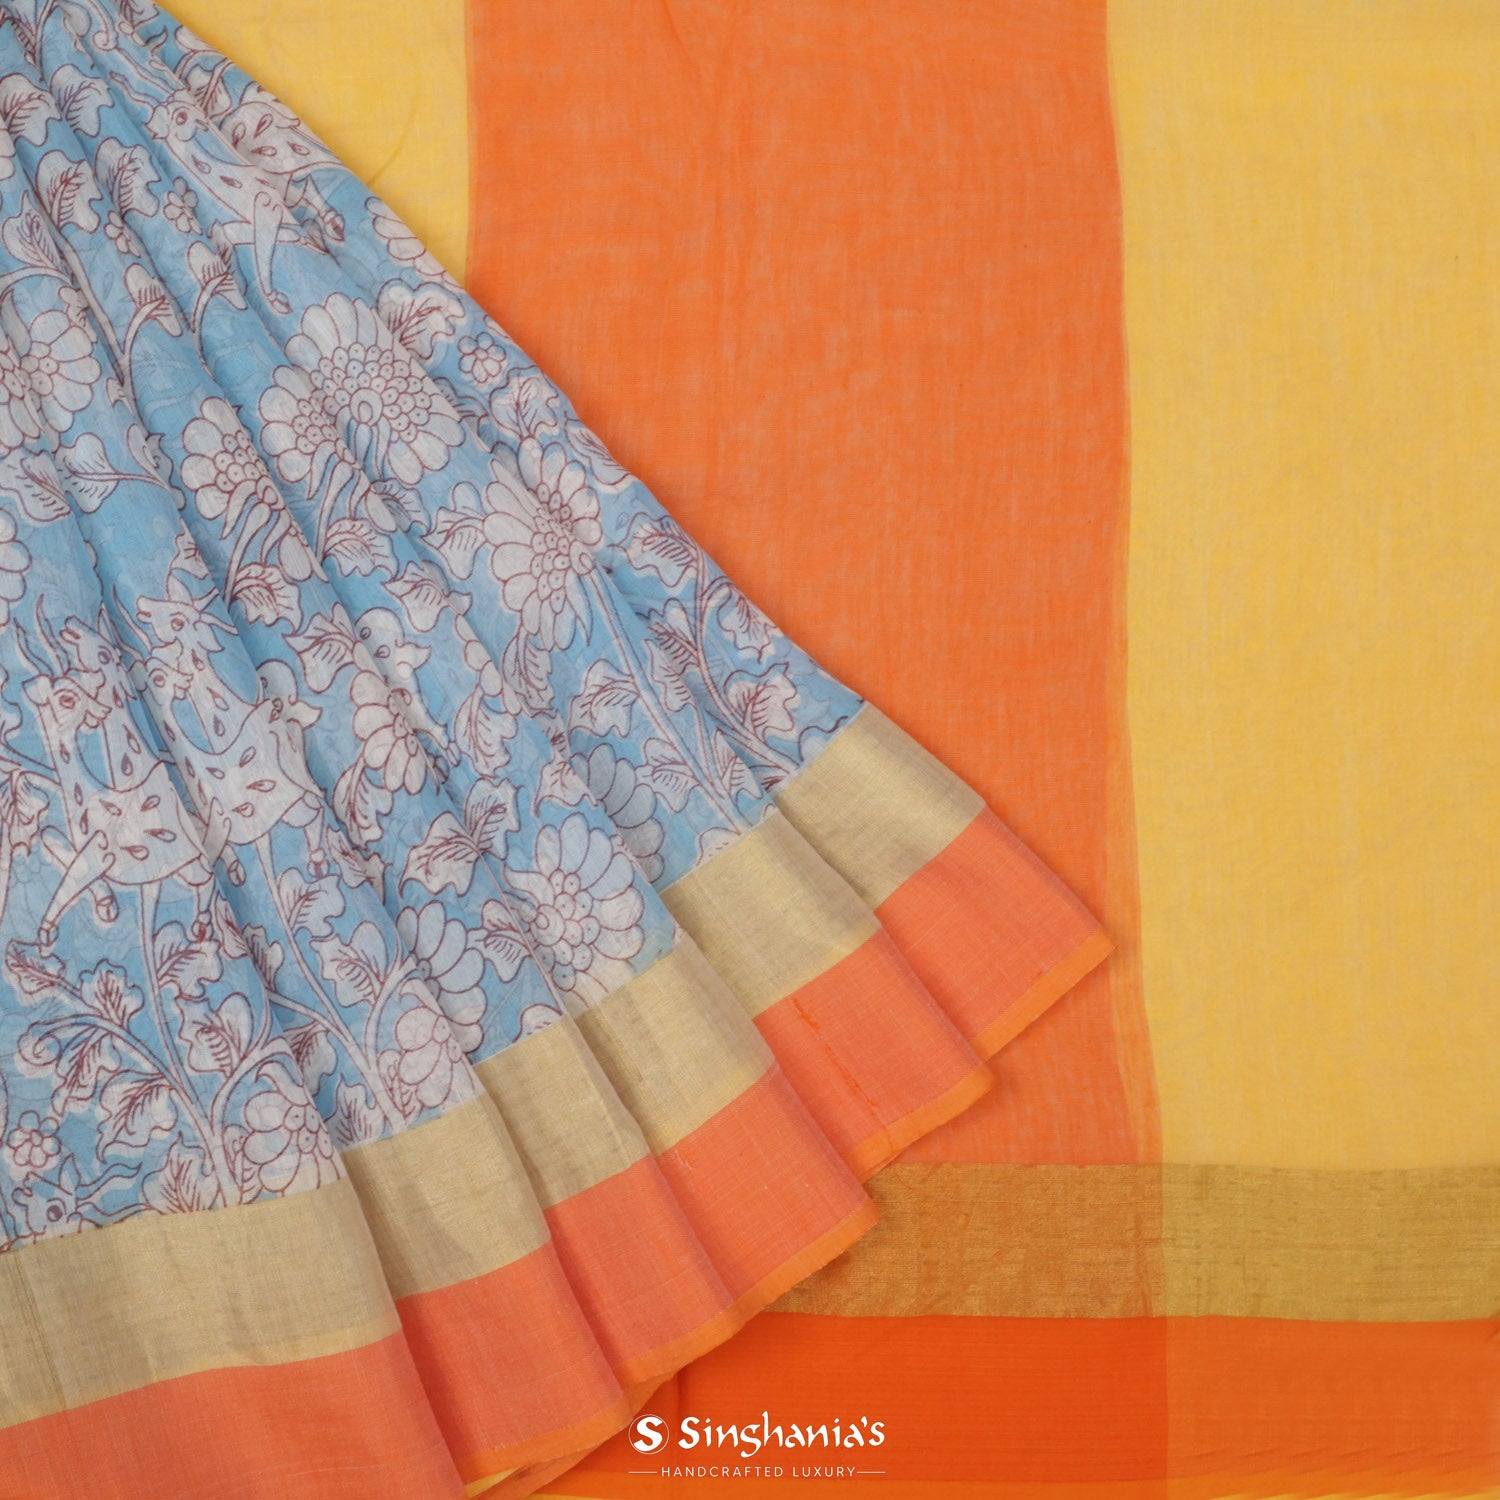 Baby Blue Cotton Saree With Printed Flora-Fauna-Inspired Design